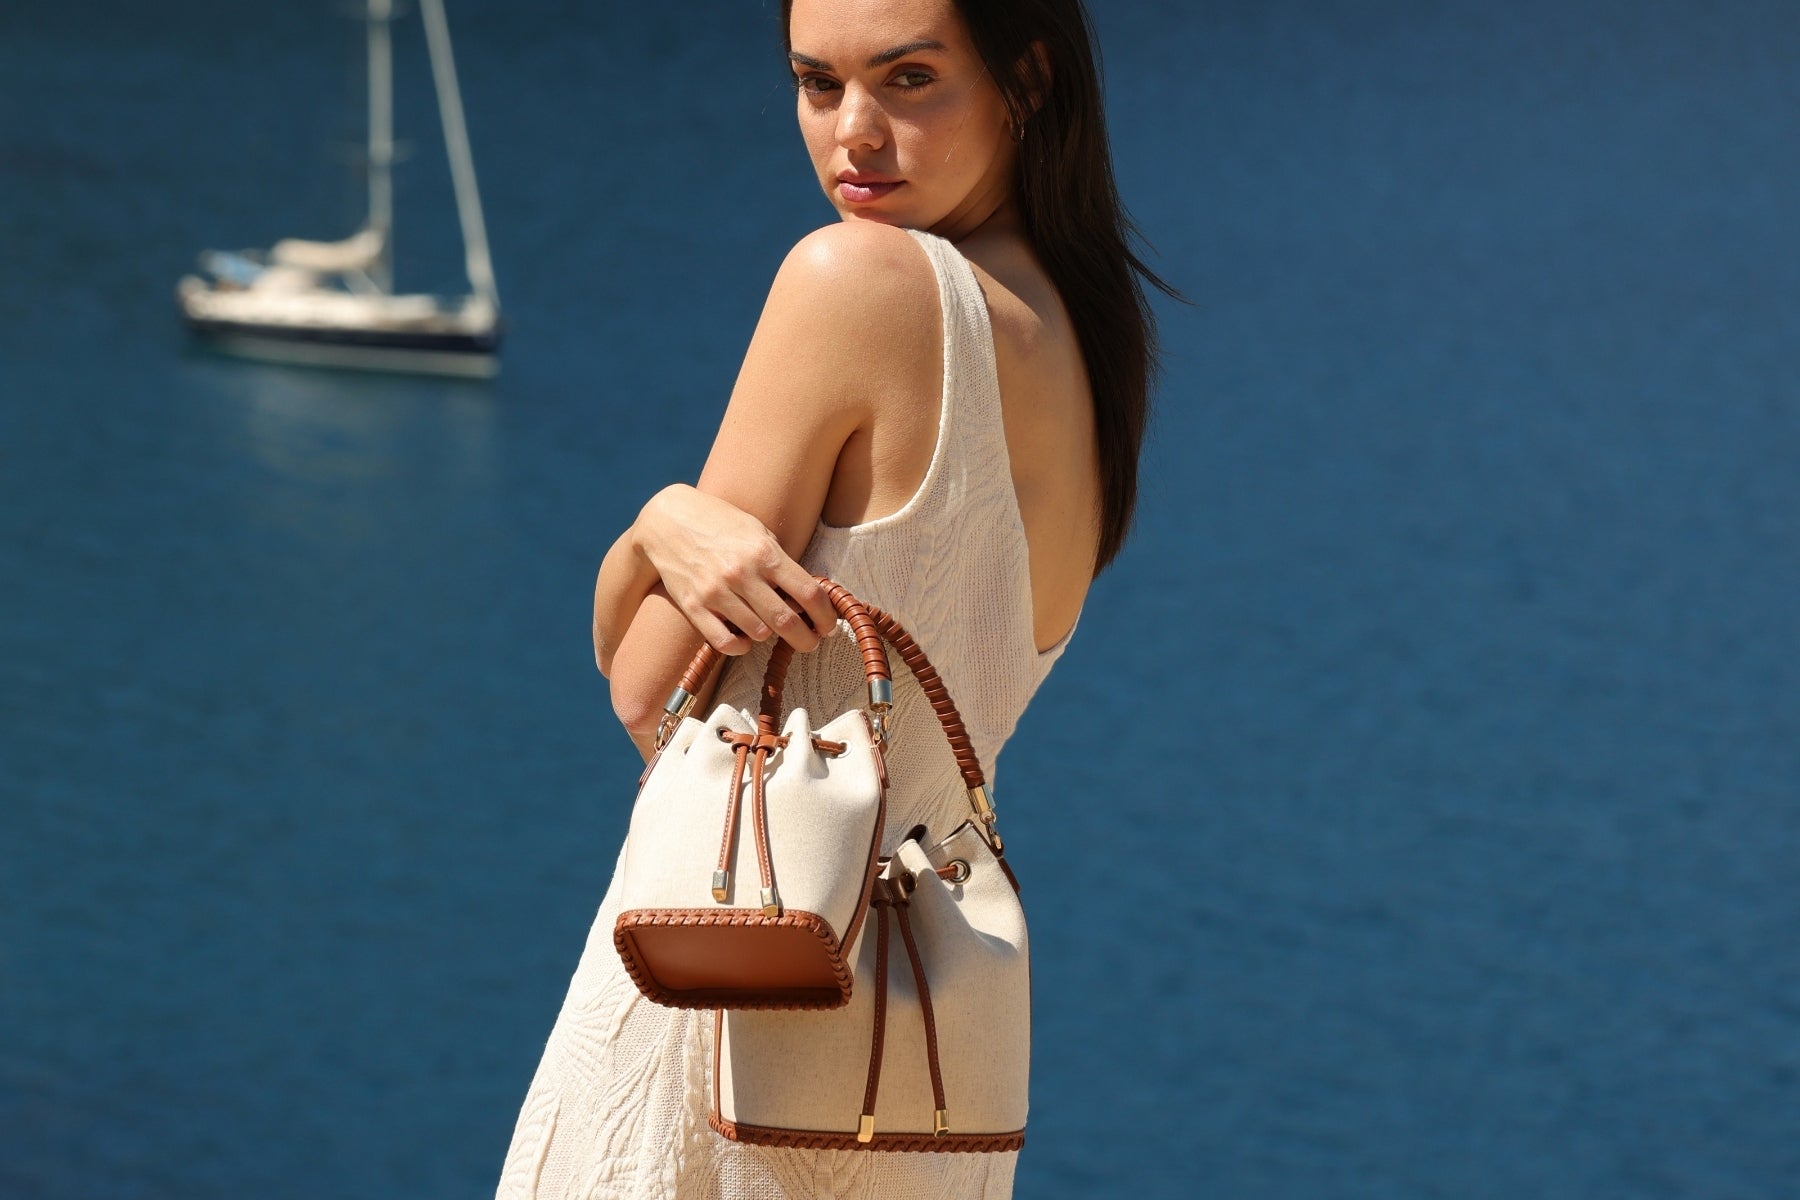 SAONARA is a brand of handcrafted bags and accessories, Made in Spain